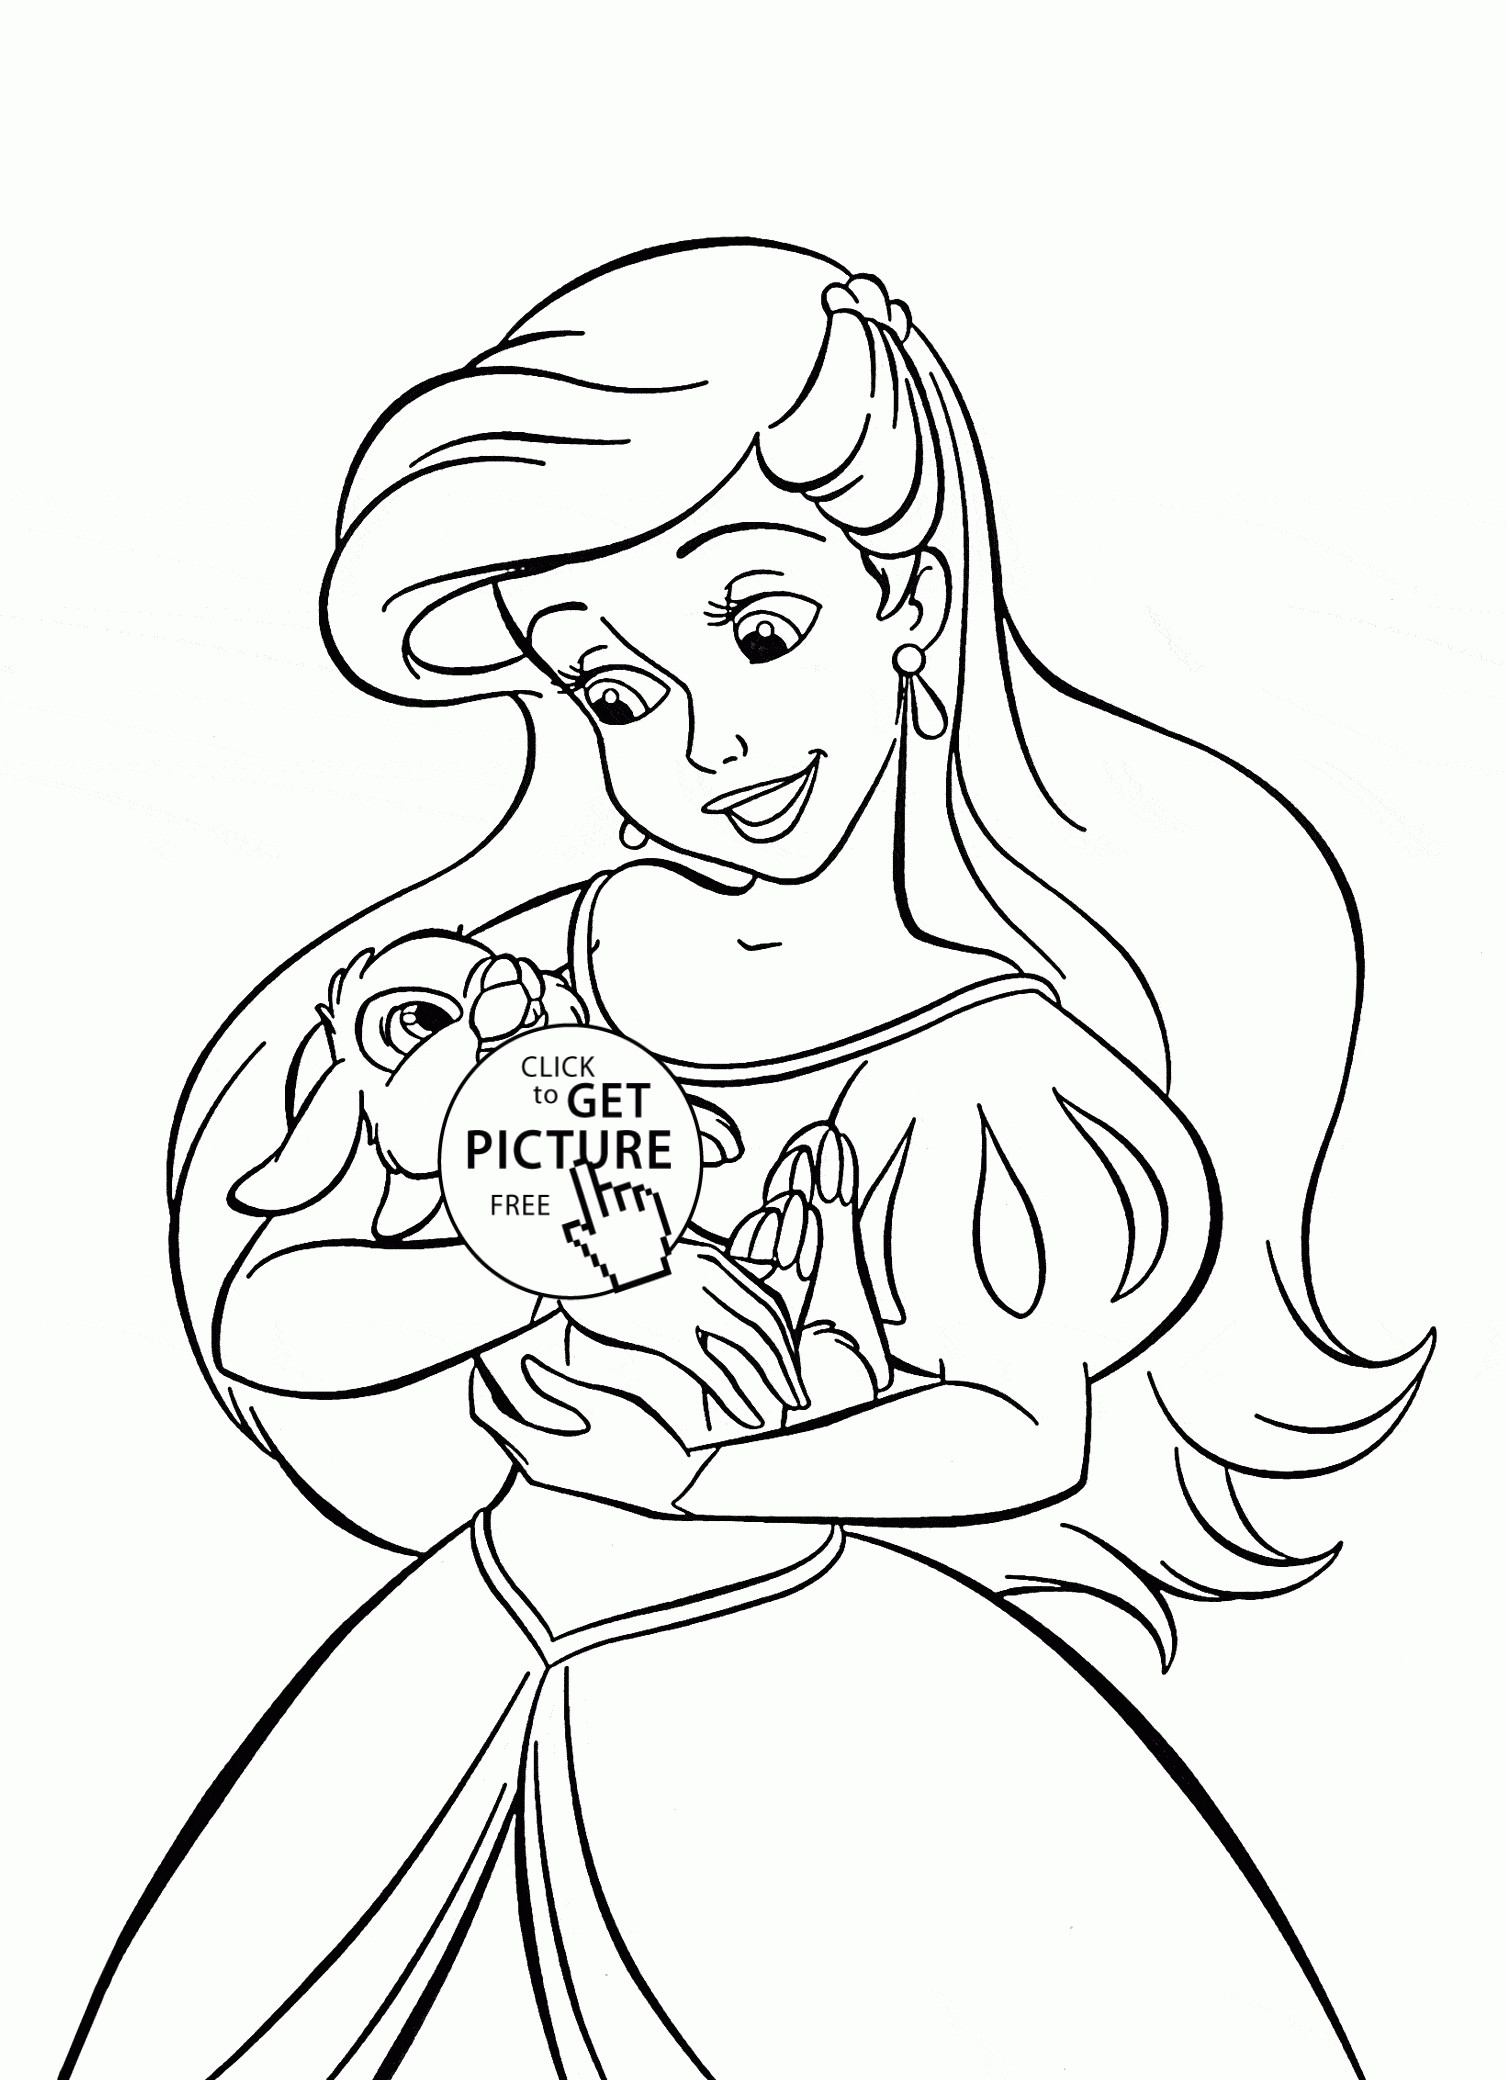 Princess Coloring Pages For Girls
 Disney Princess Ariel Coloring Pages For Girls